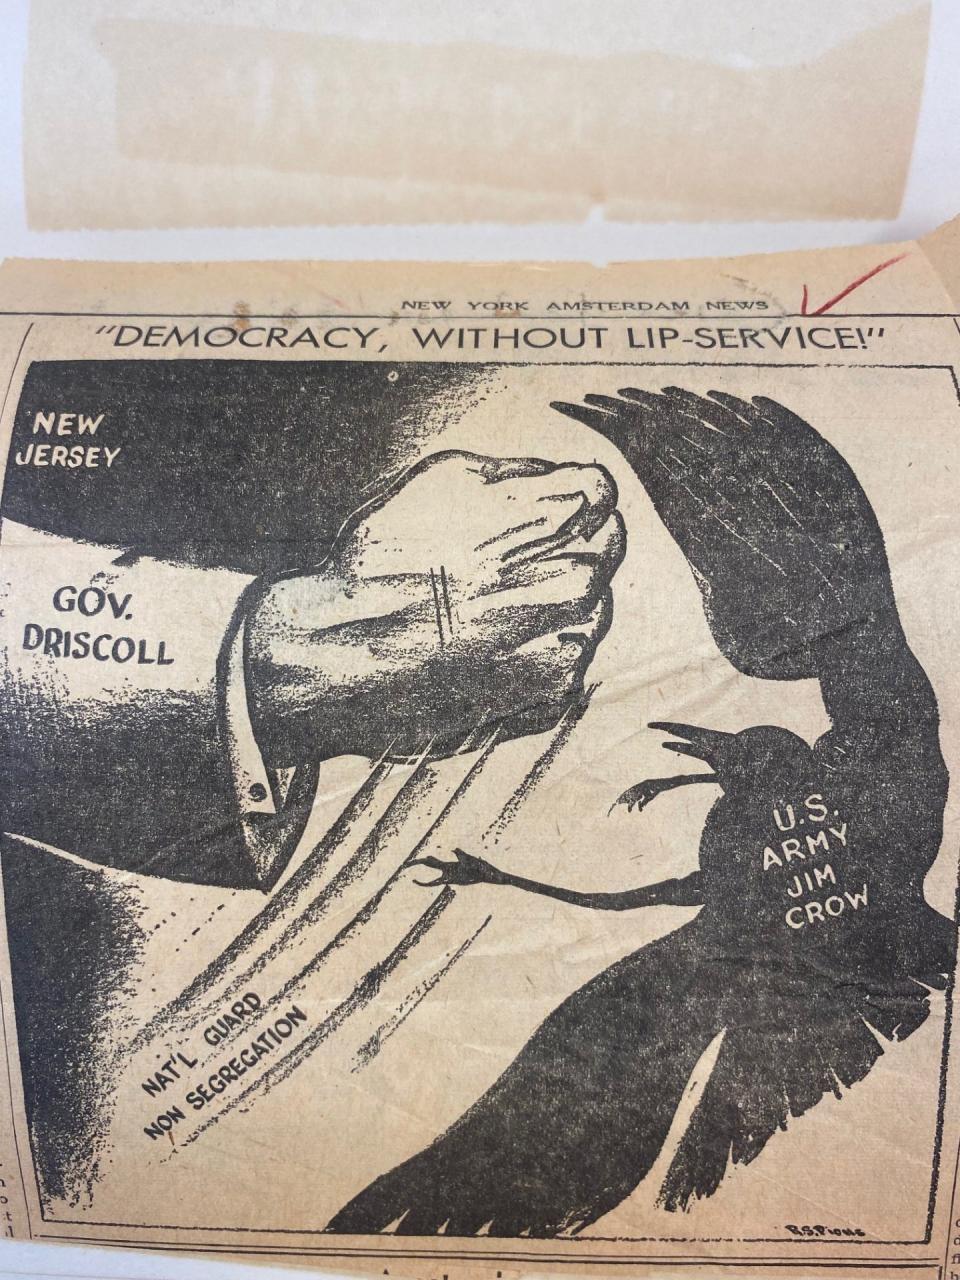 This editorial cartoon, published by the New York Amsterdam News, cheers New Jersey Gov. Alfred Driscoll's move to desegregate New Jersey's National Guard